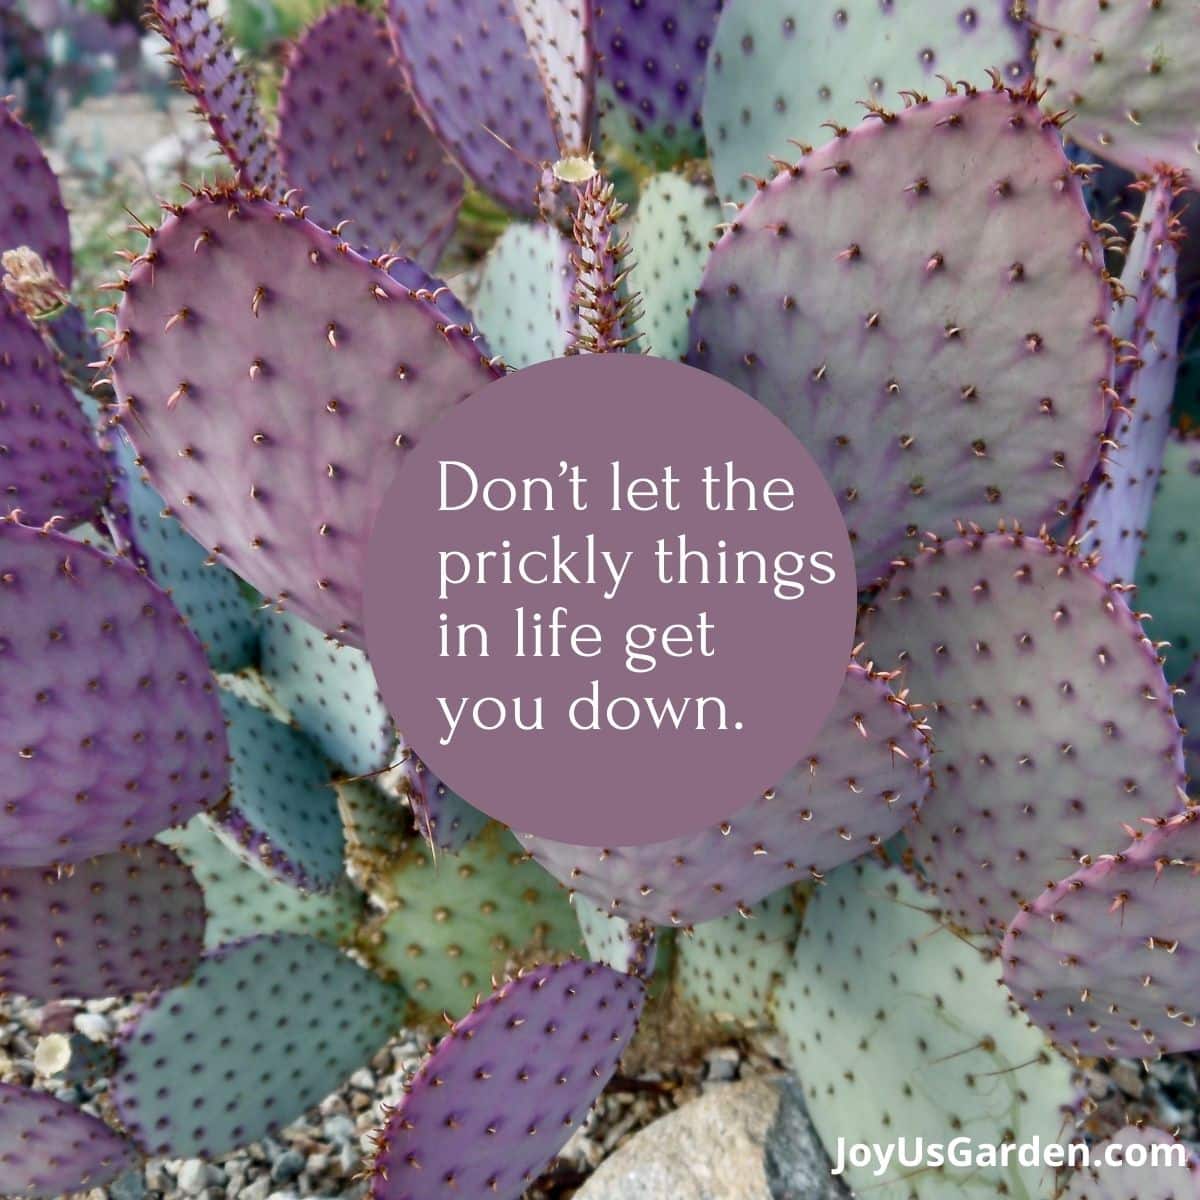 purple santa rita prickly pear background text reads dont let the prickly things in life get you down.